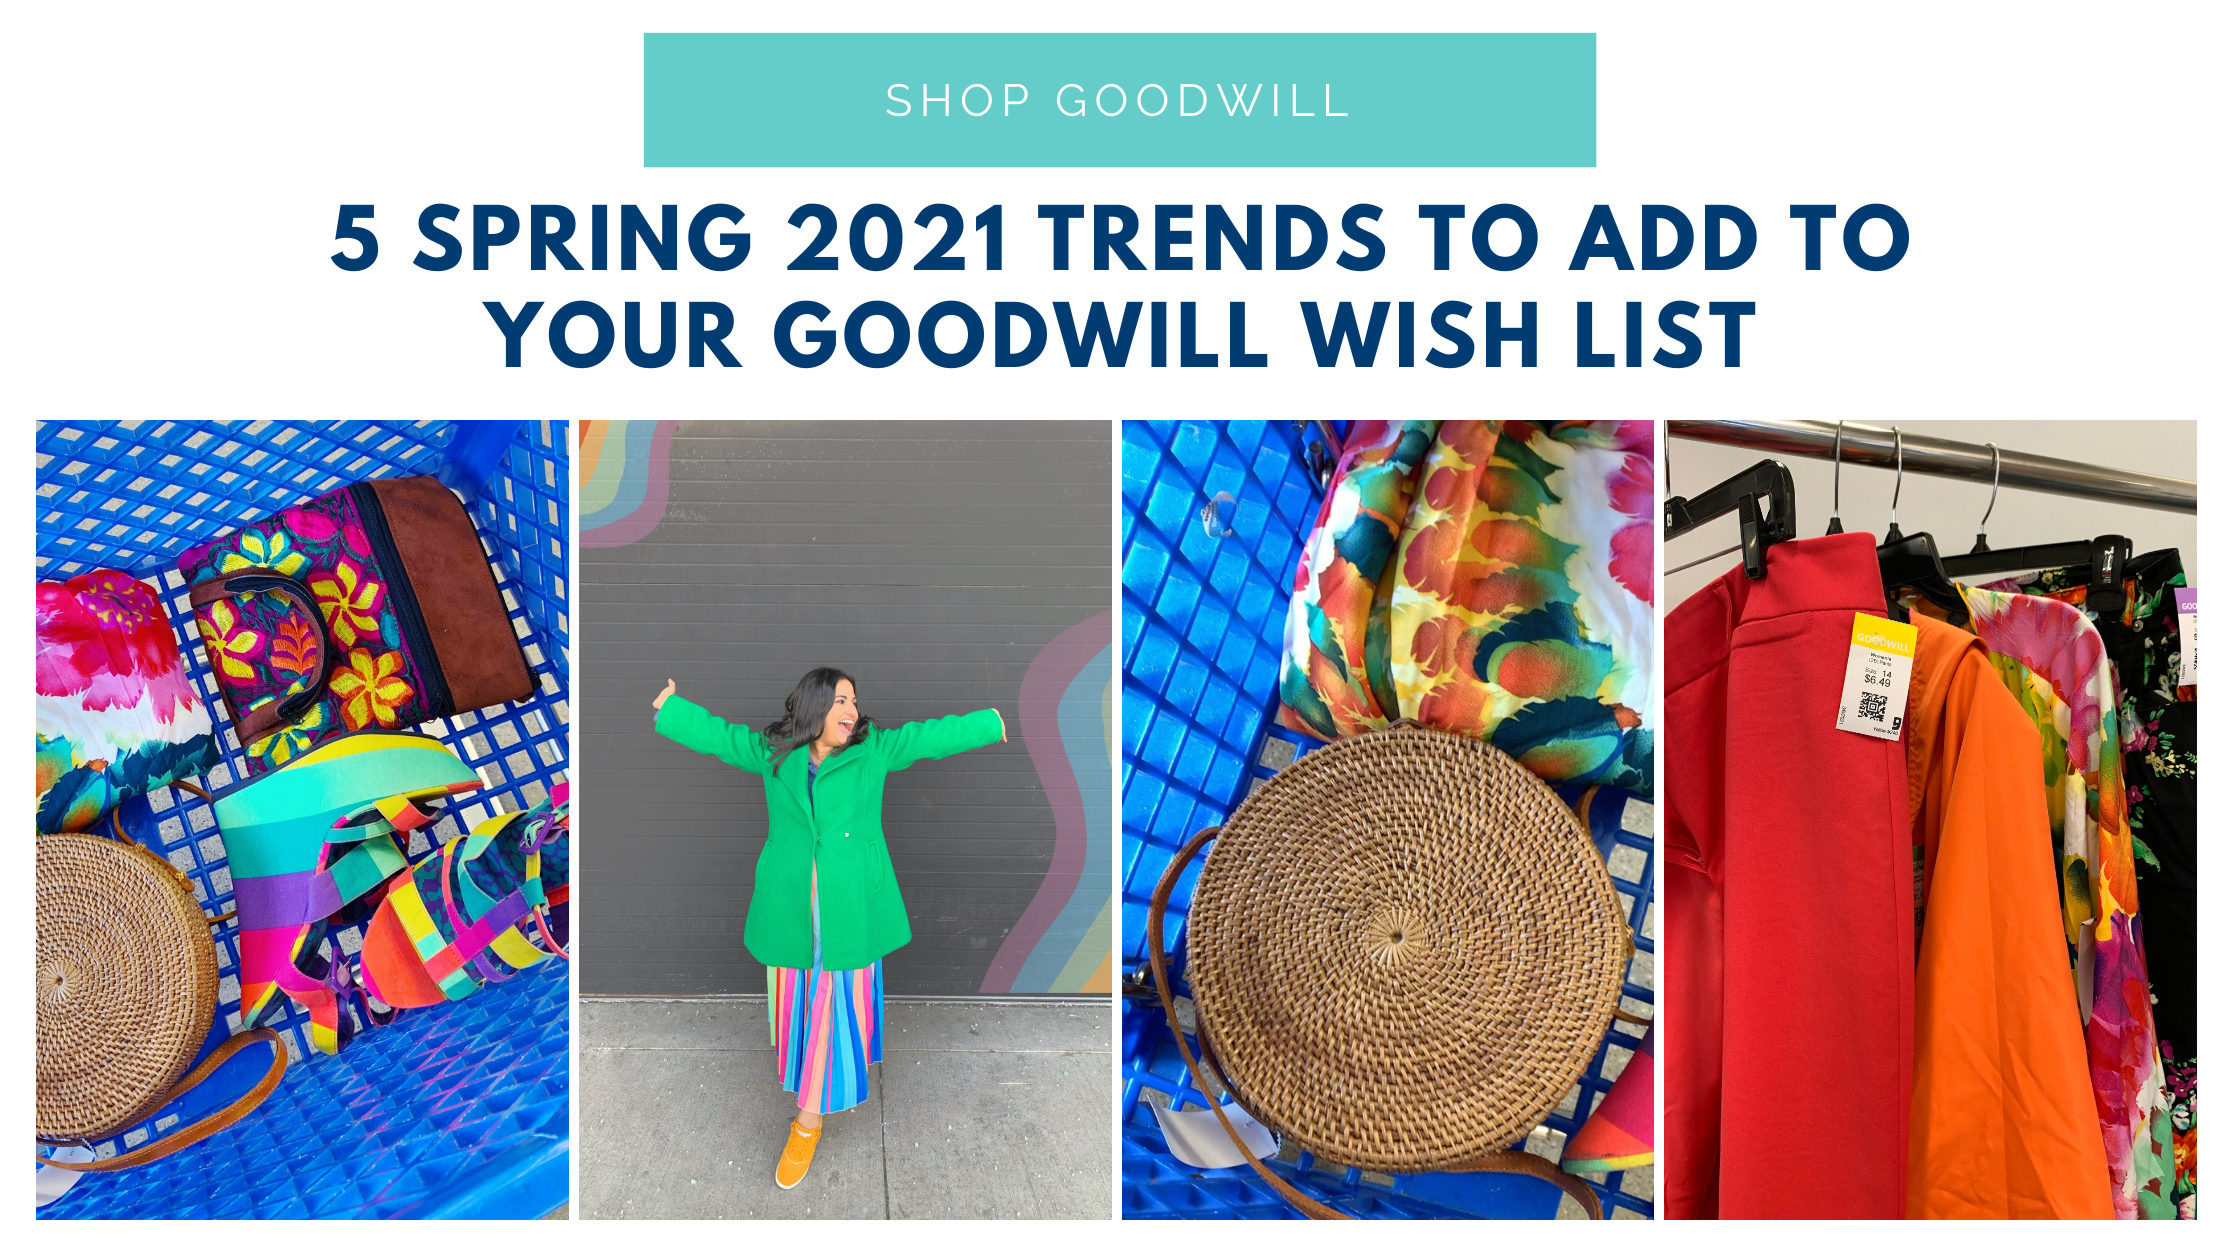 5 Spring 2021 Trends to Add to Your Goodwill Wish List